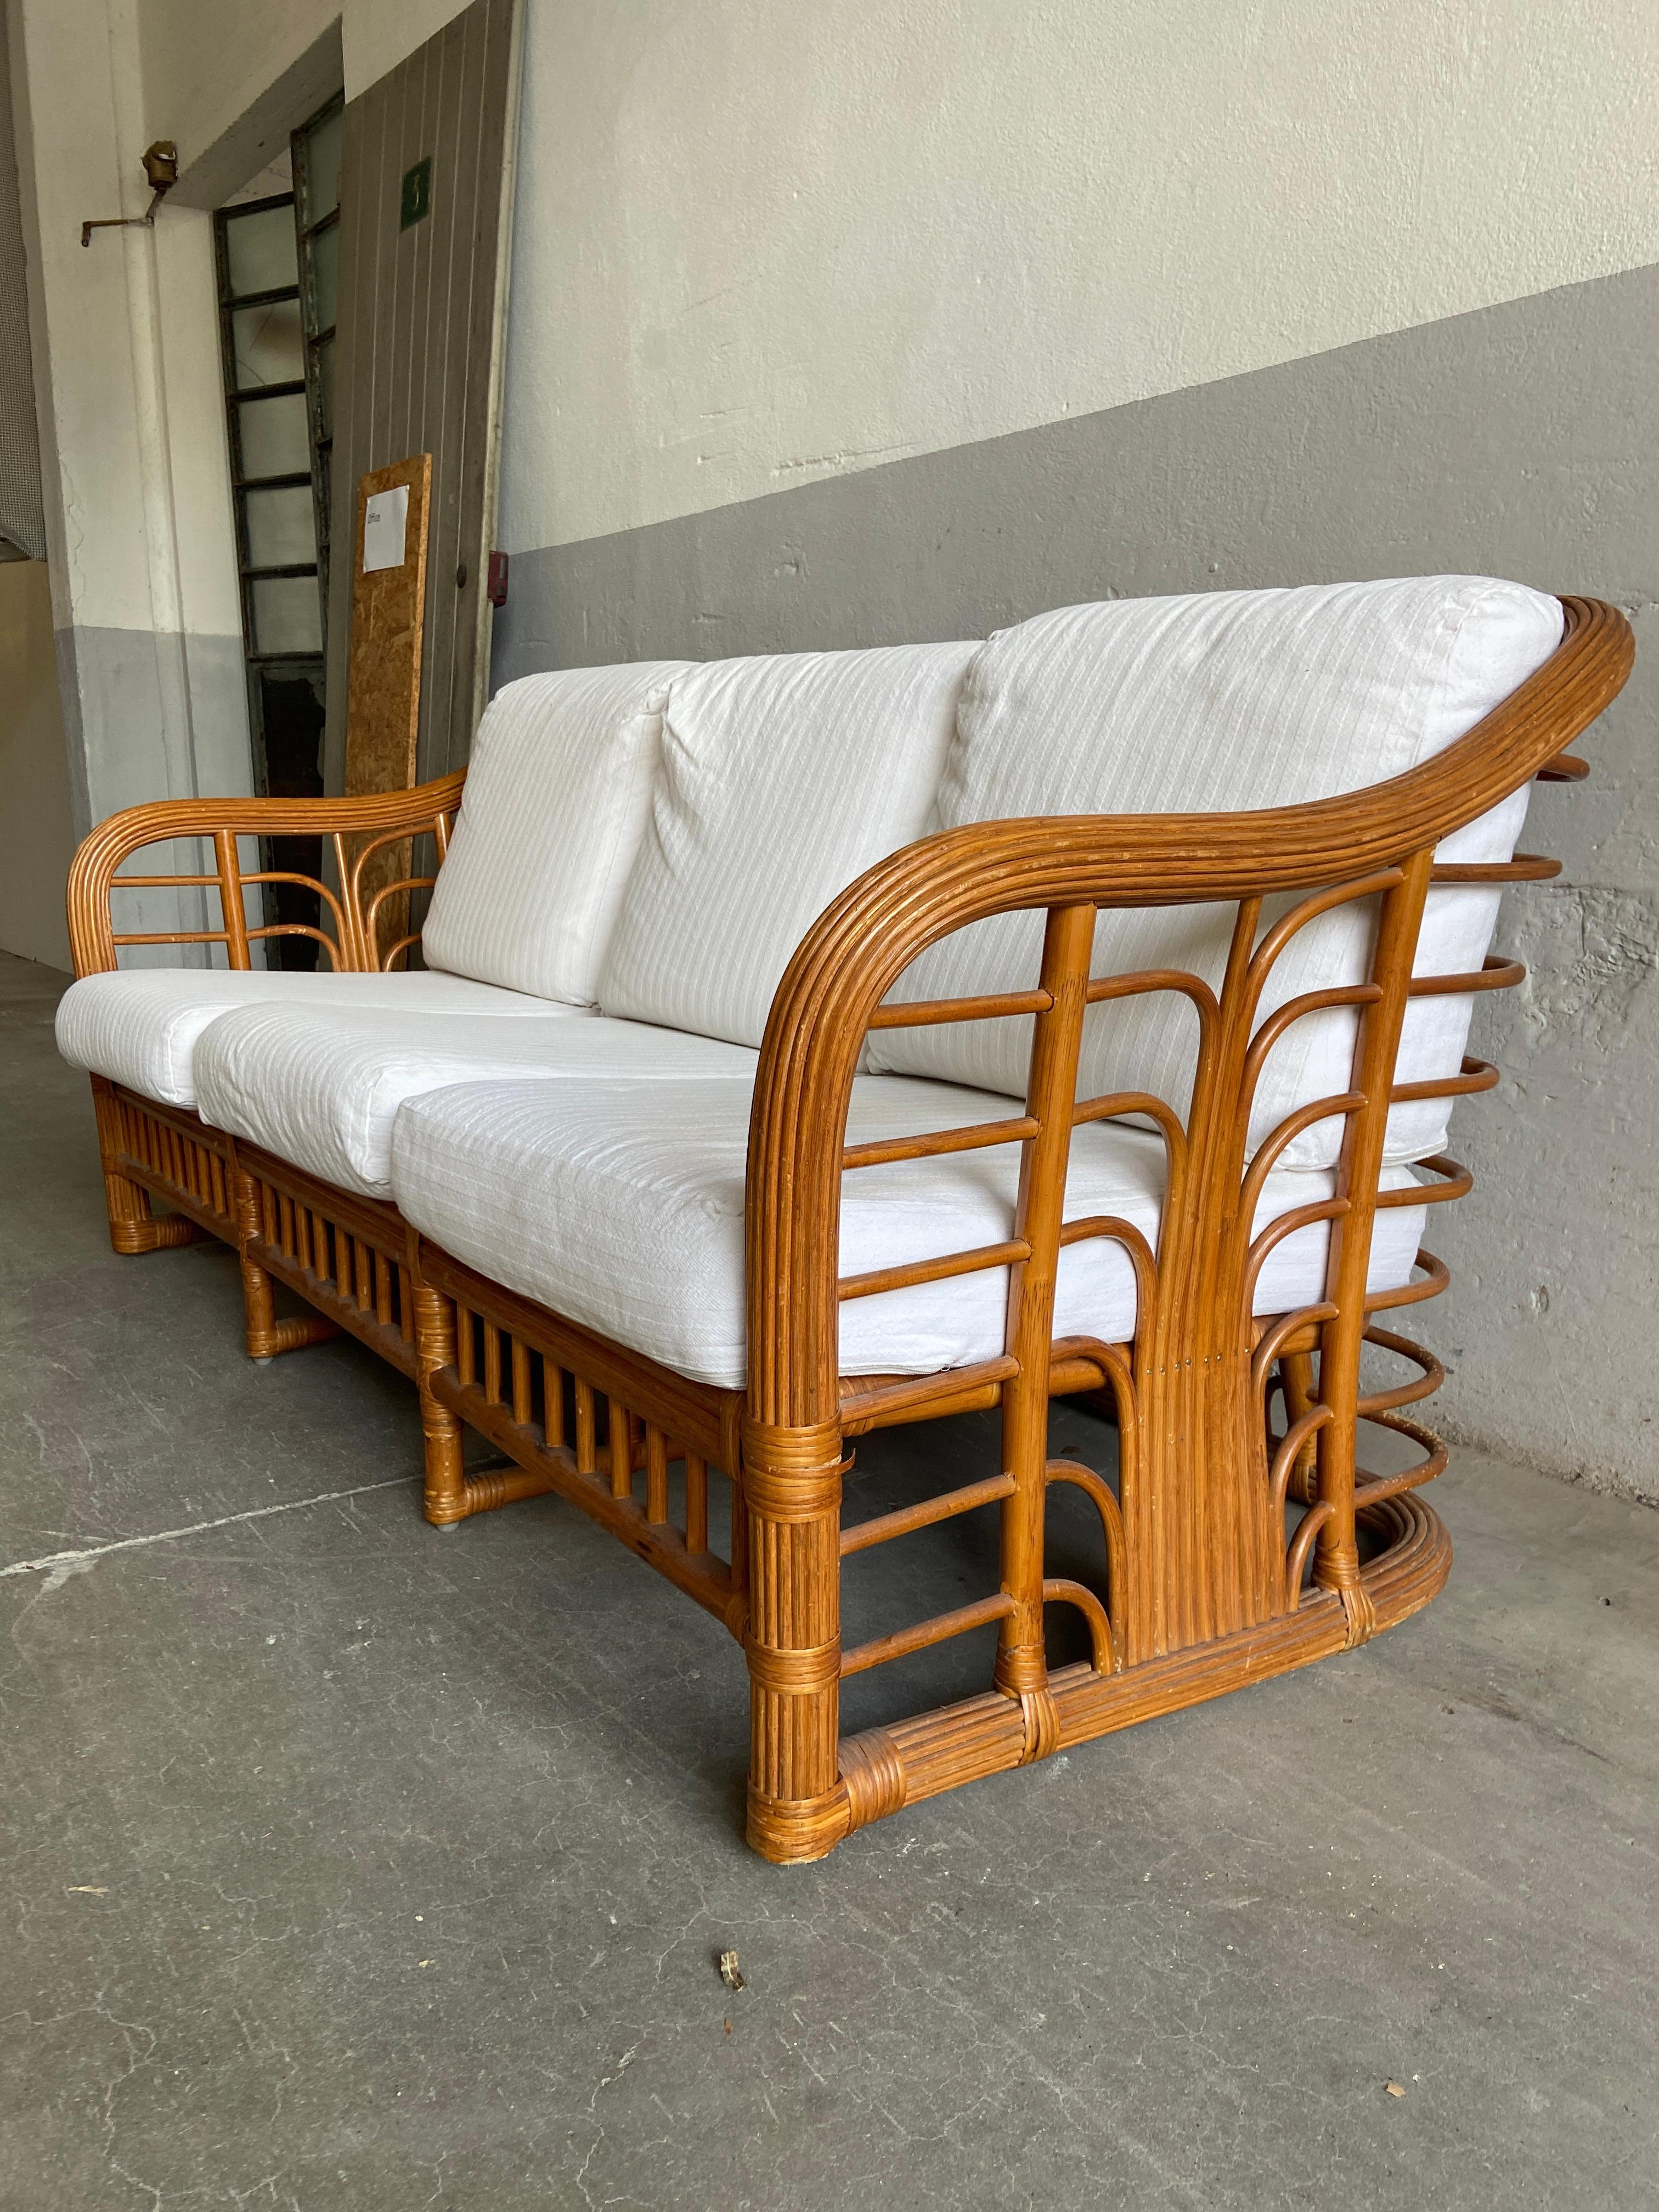 Late 20th Century Mid-Century Modern Italian Bamboo Sofa by Vivai del Sud, 1970s For Sale